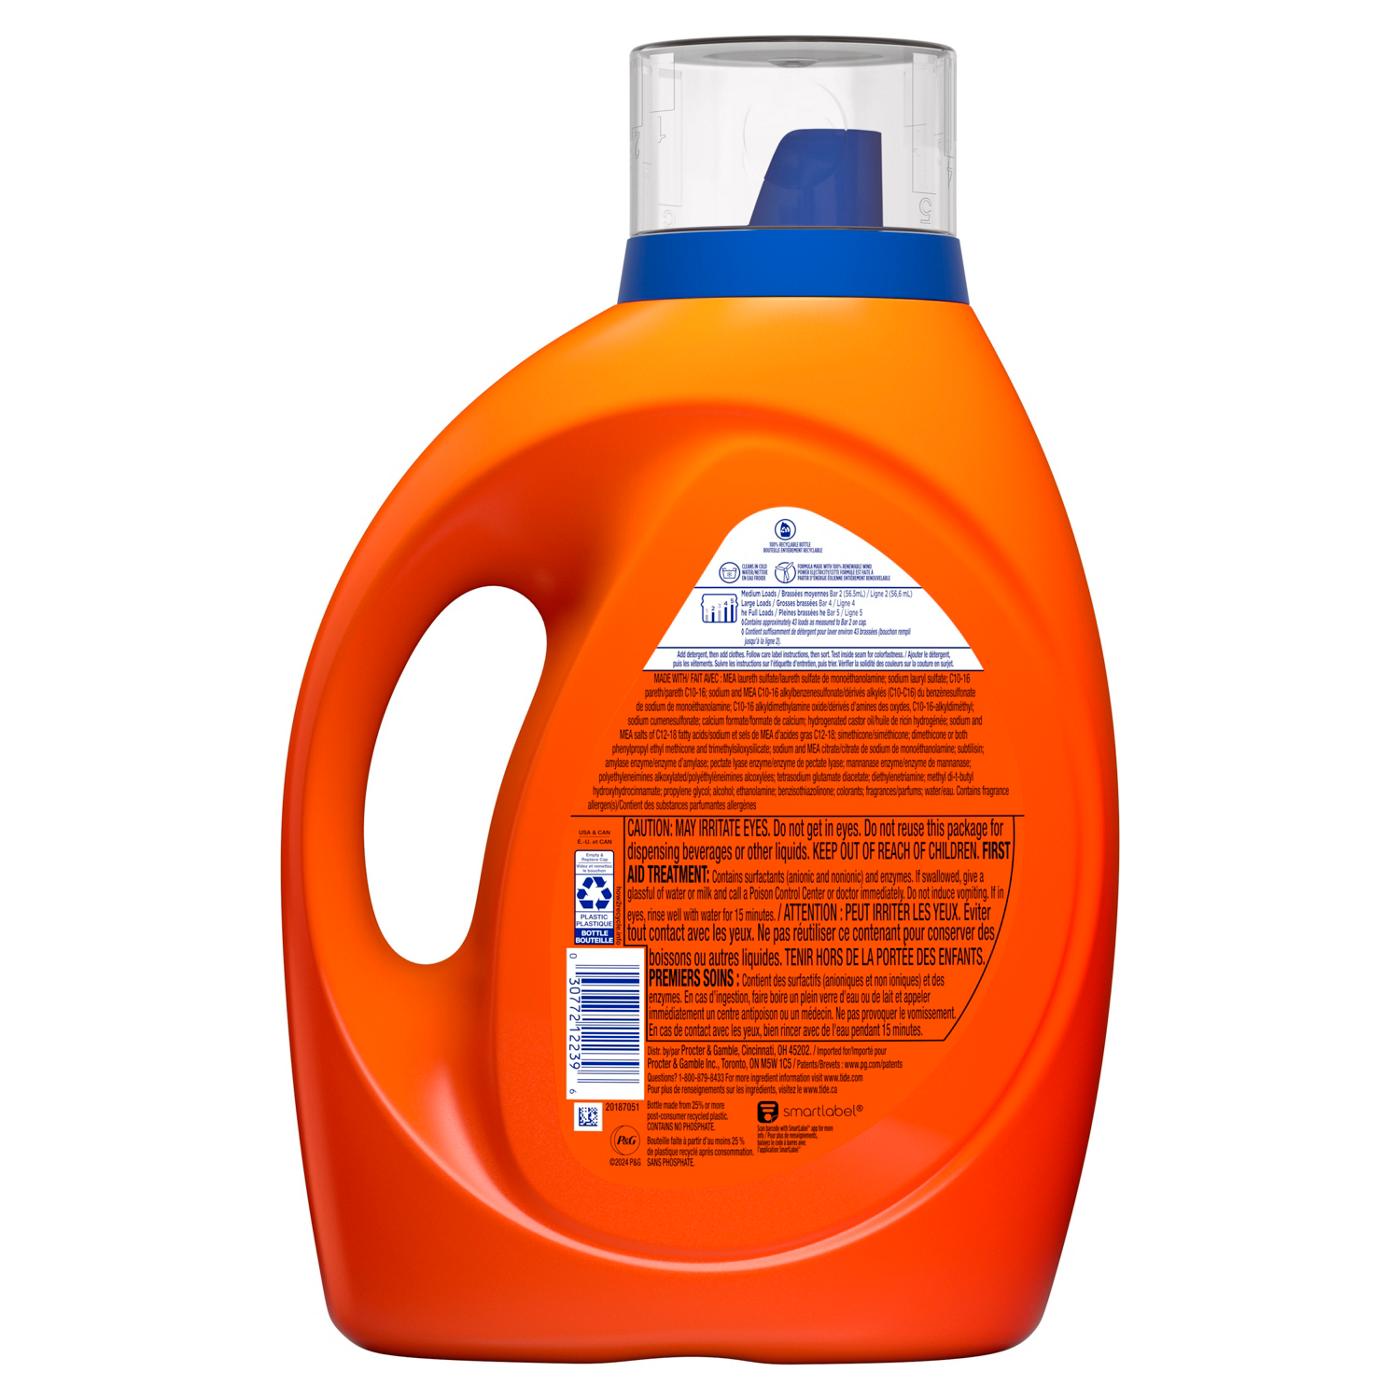 Tide Ultra Stain Release HE Turbo Clean Liquid Laundry Detergent, 43 Loads - Original; image 6 of 6